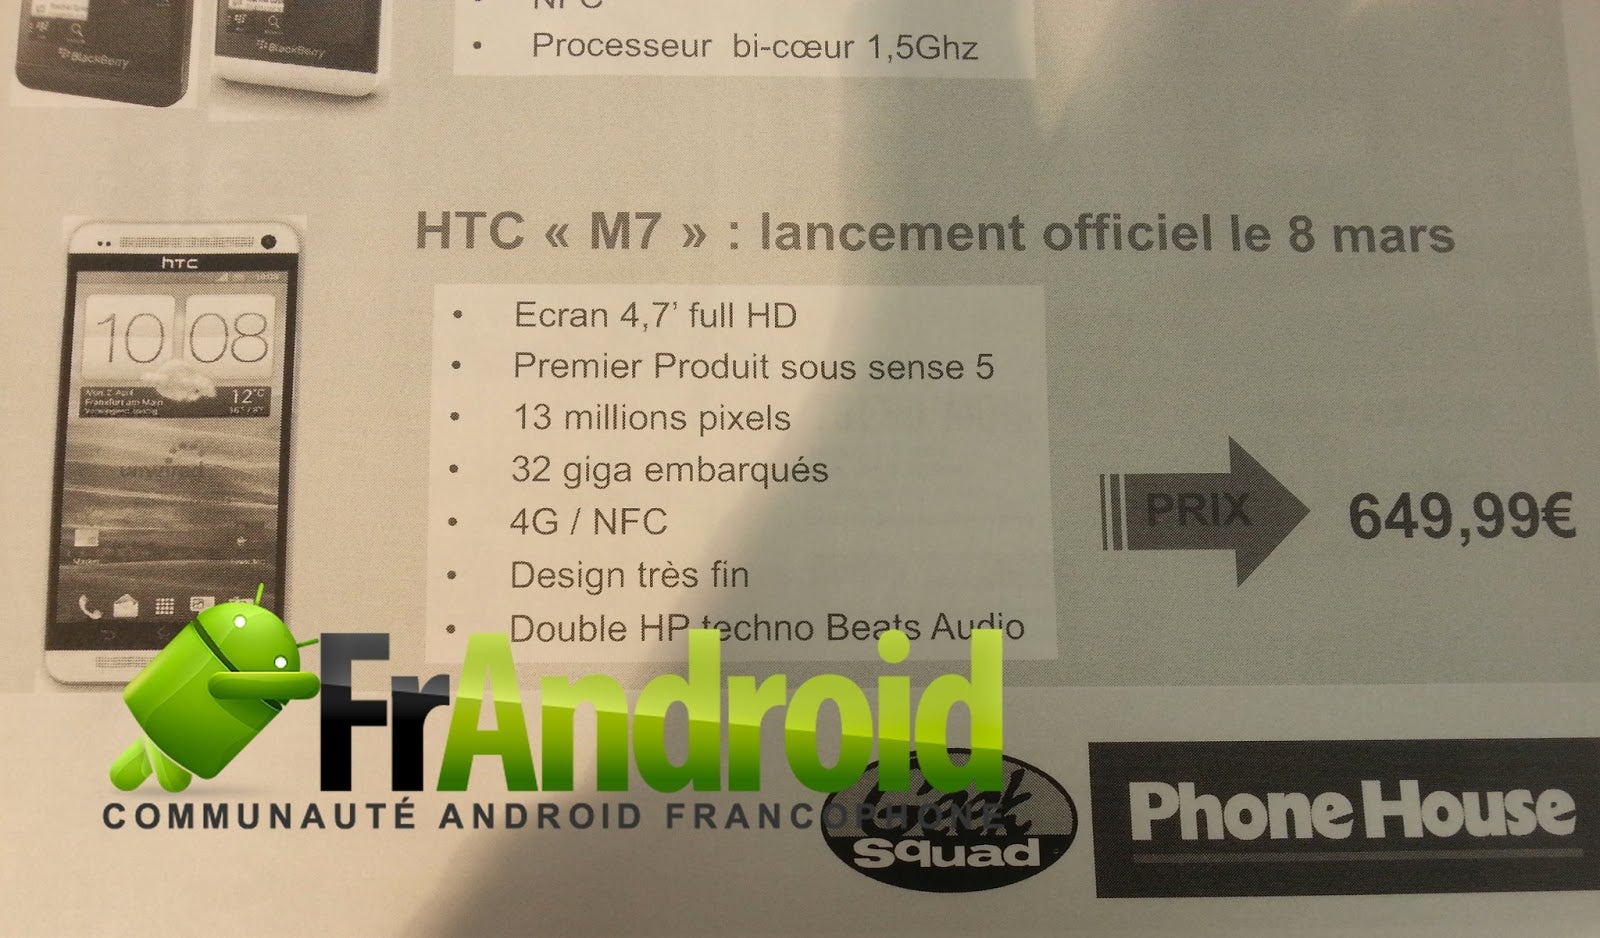 HTC M7 arriving March 8 in France for €650 with the exact same name